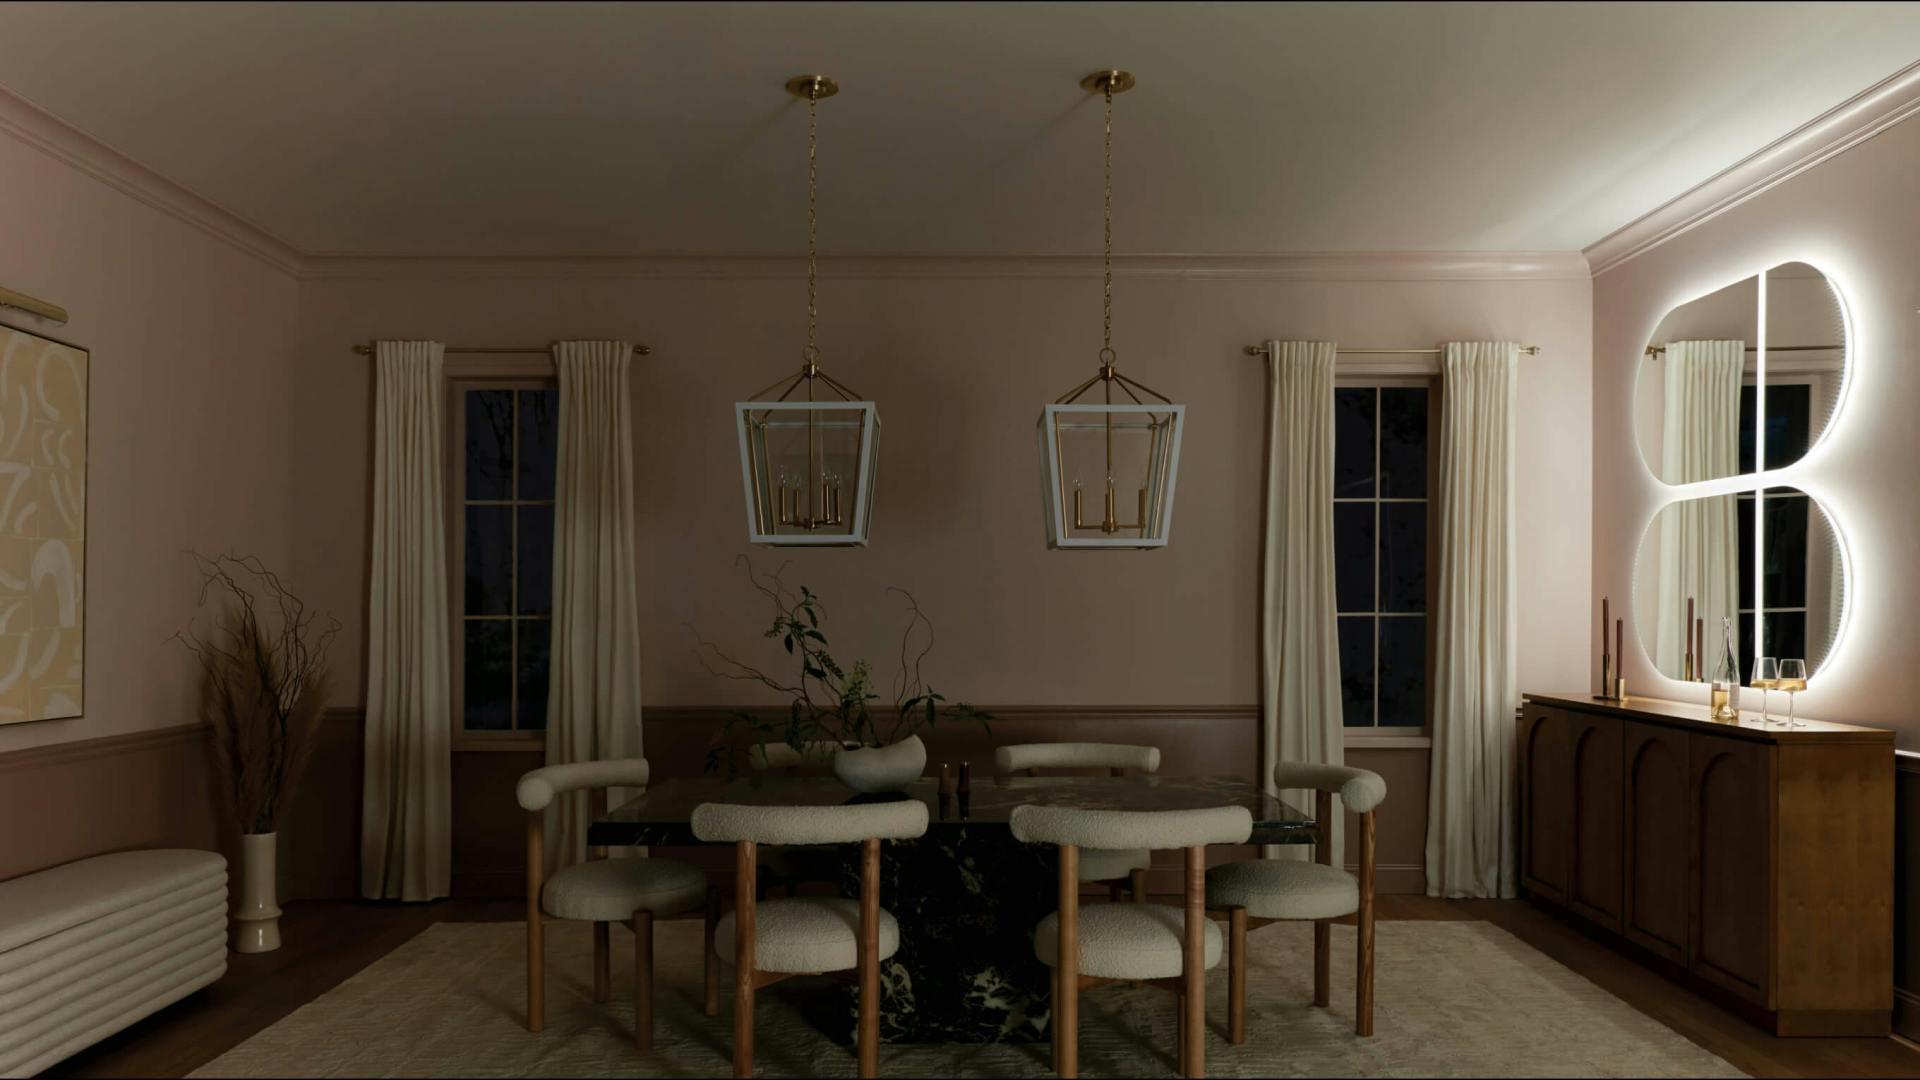 Dinning room with only a Radana mirror light turned on at the right side of the room at night 